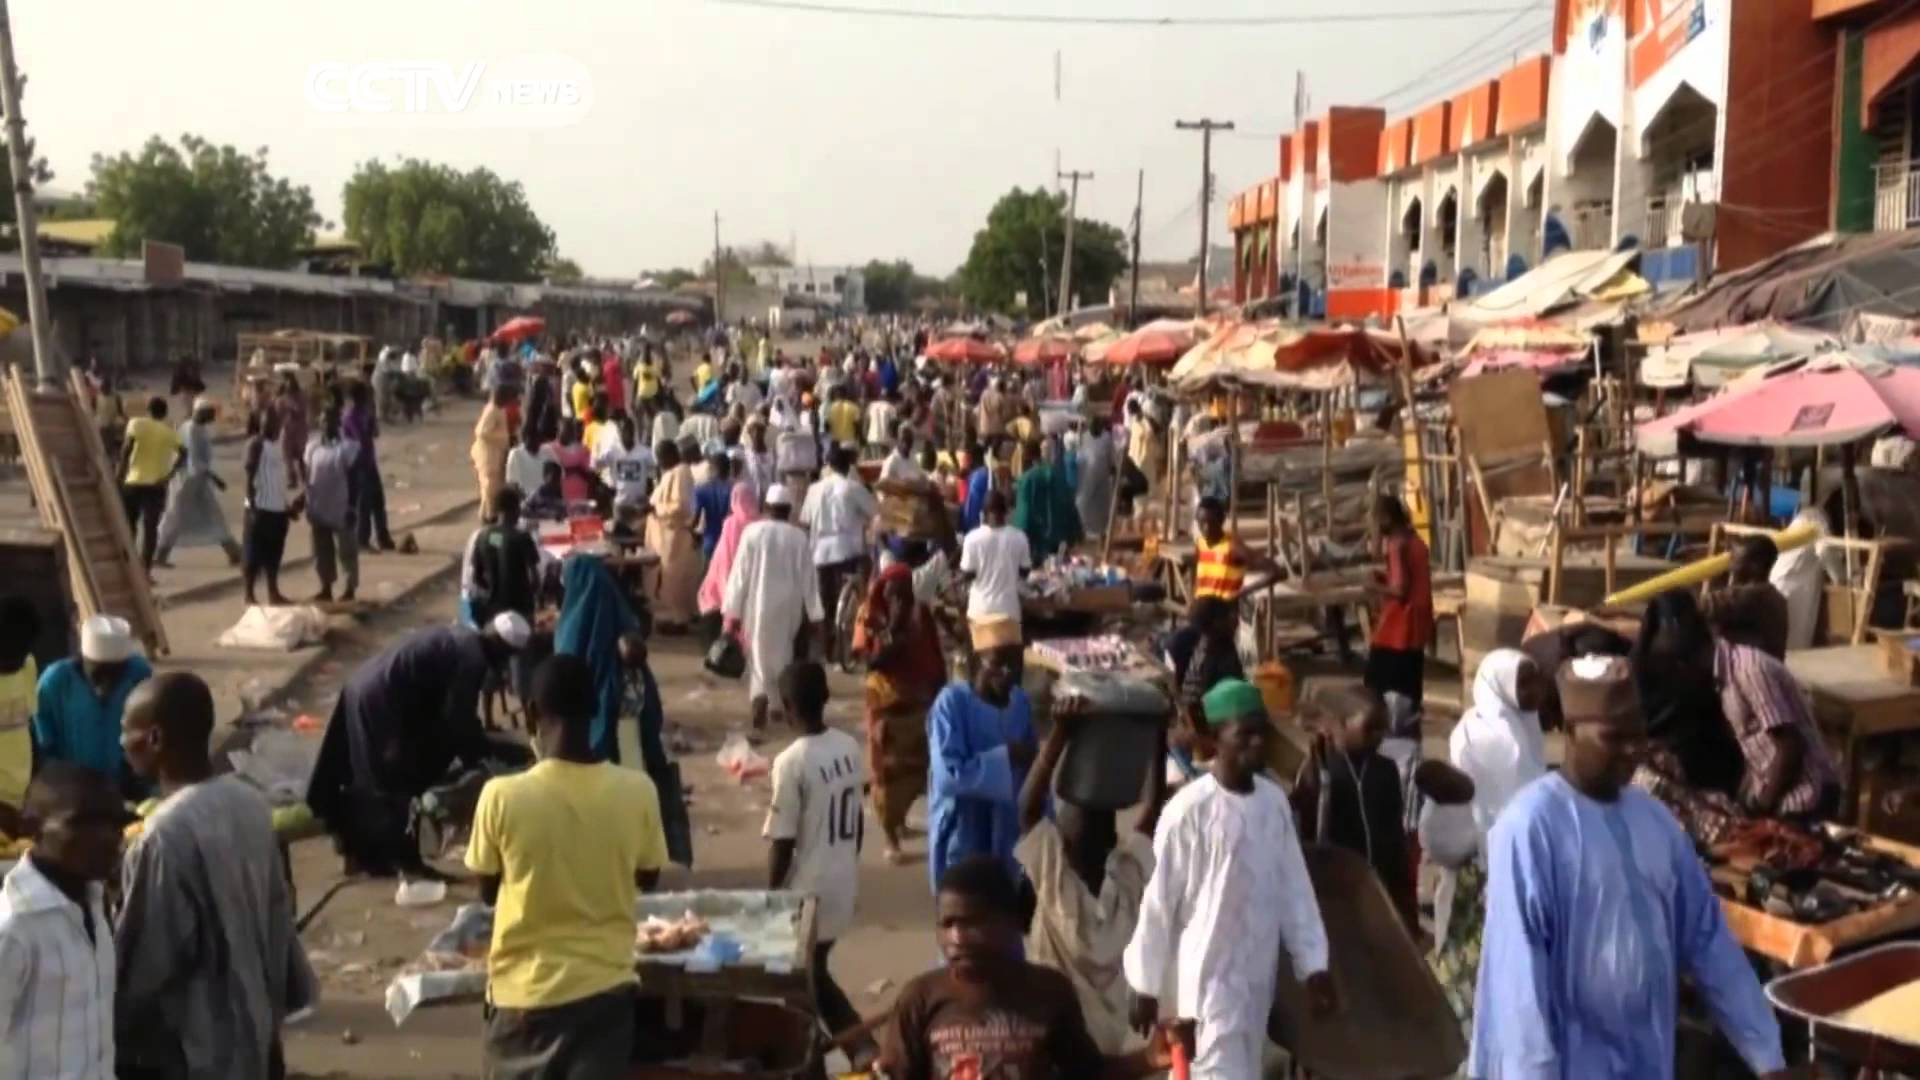 readily available street foods in Nigeria